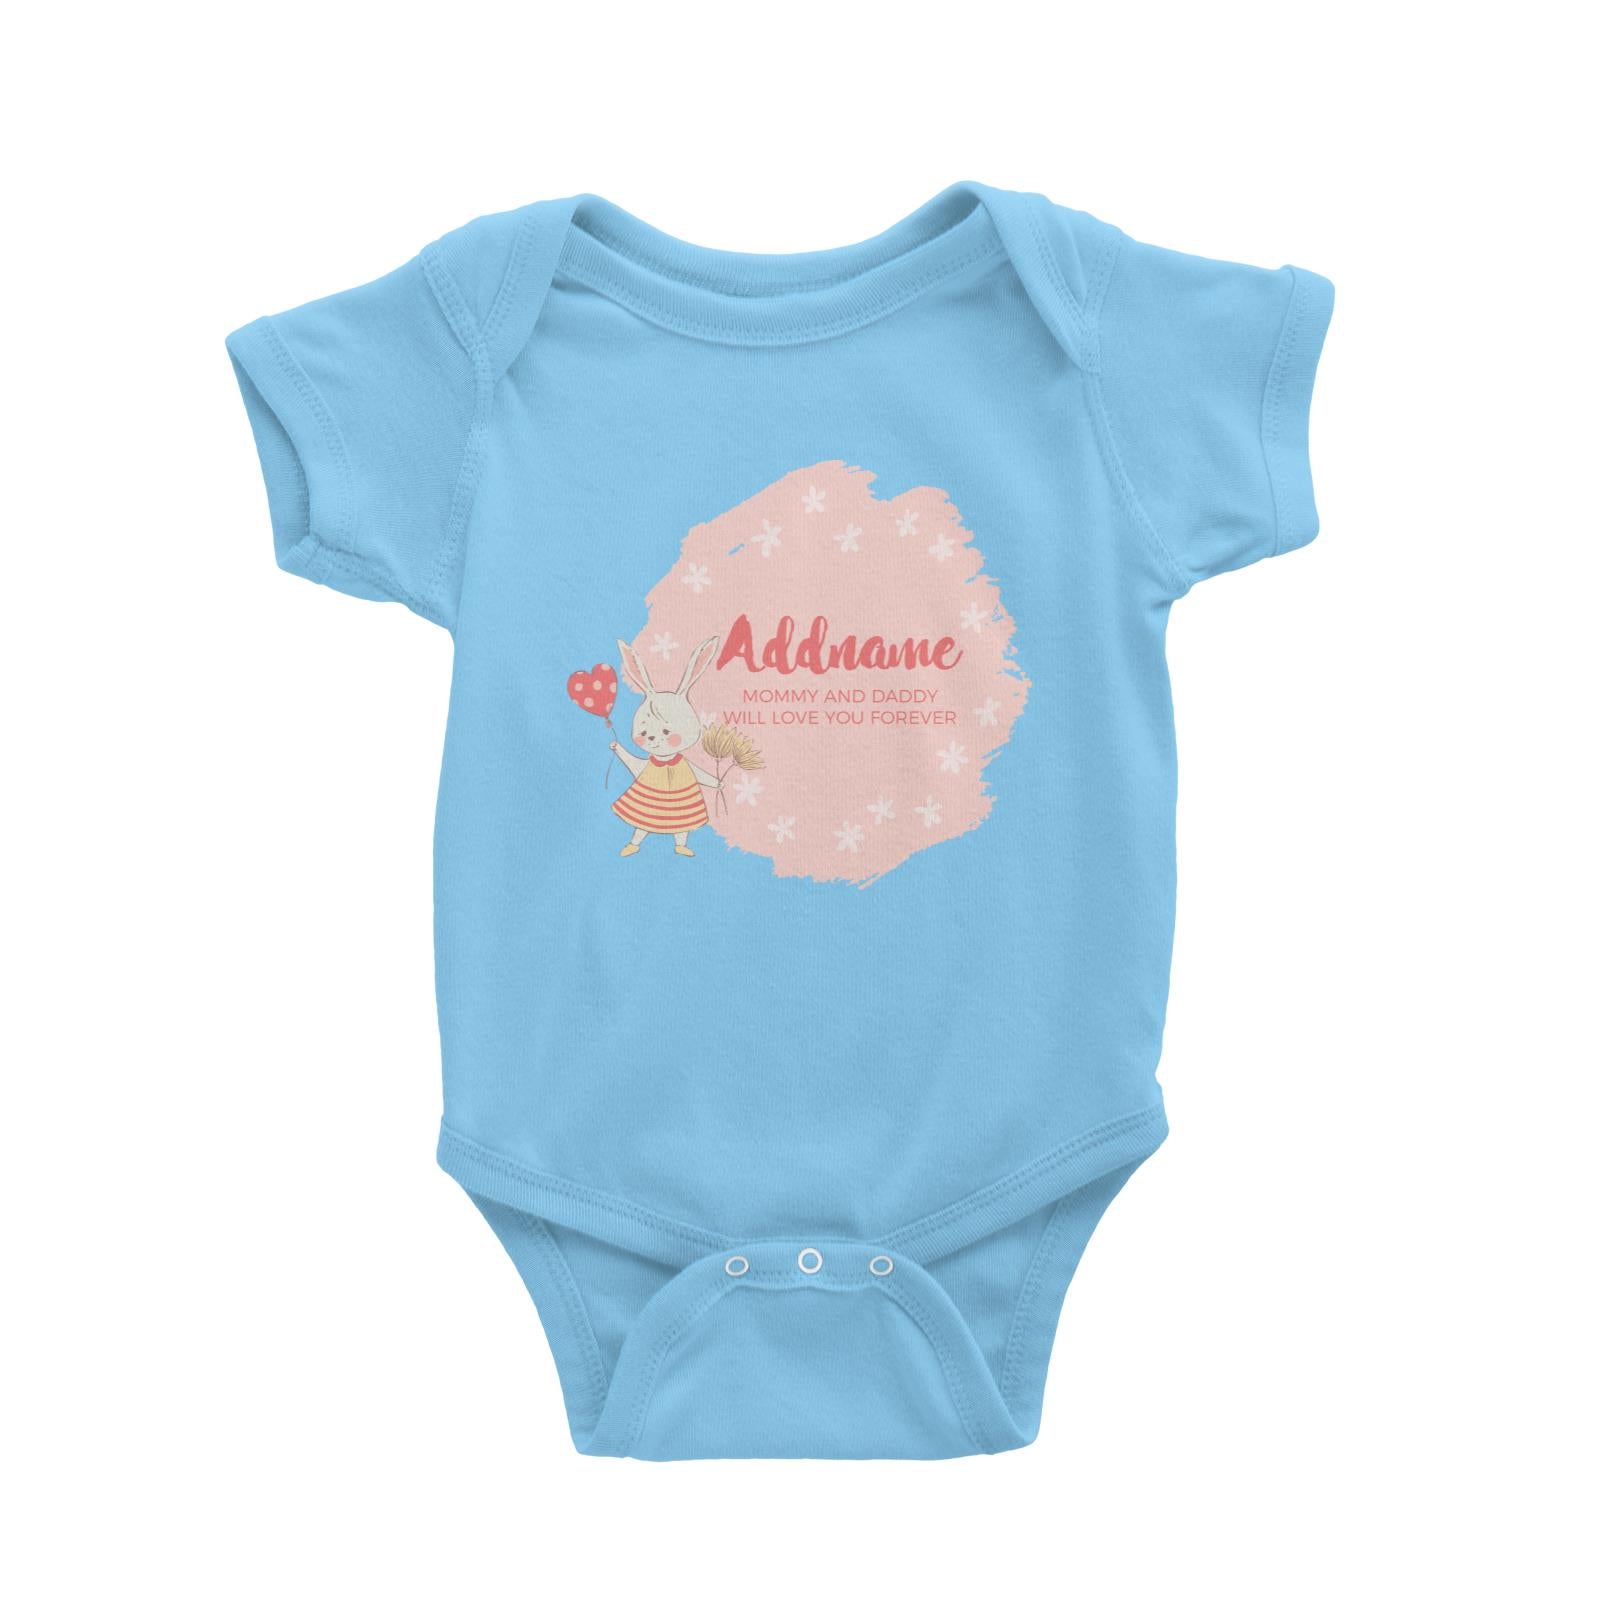 Cute Girl Rabbit with Heart Balloon Personalizable with Name and Text Baby Romper